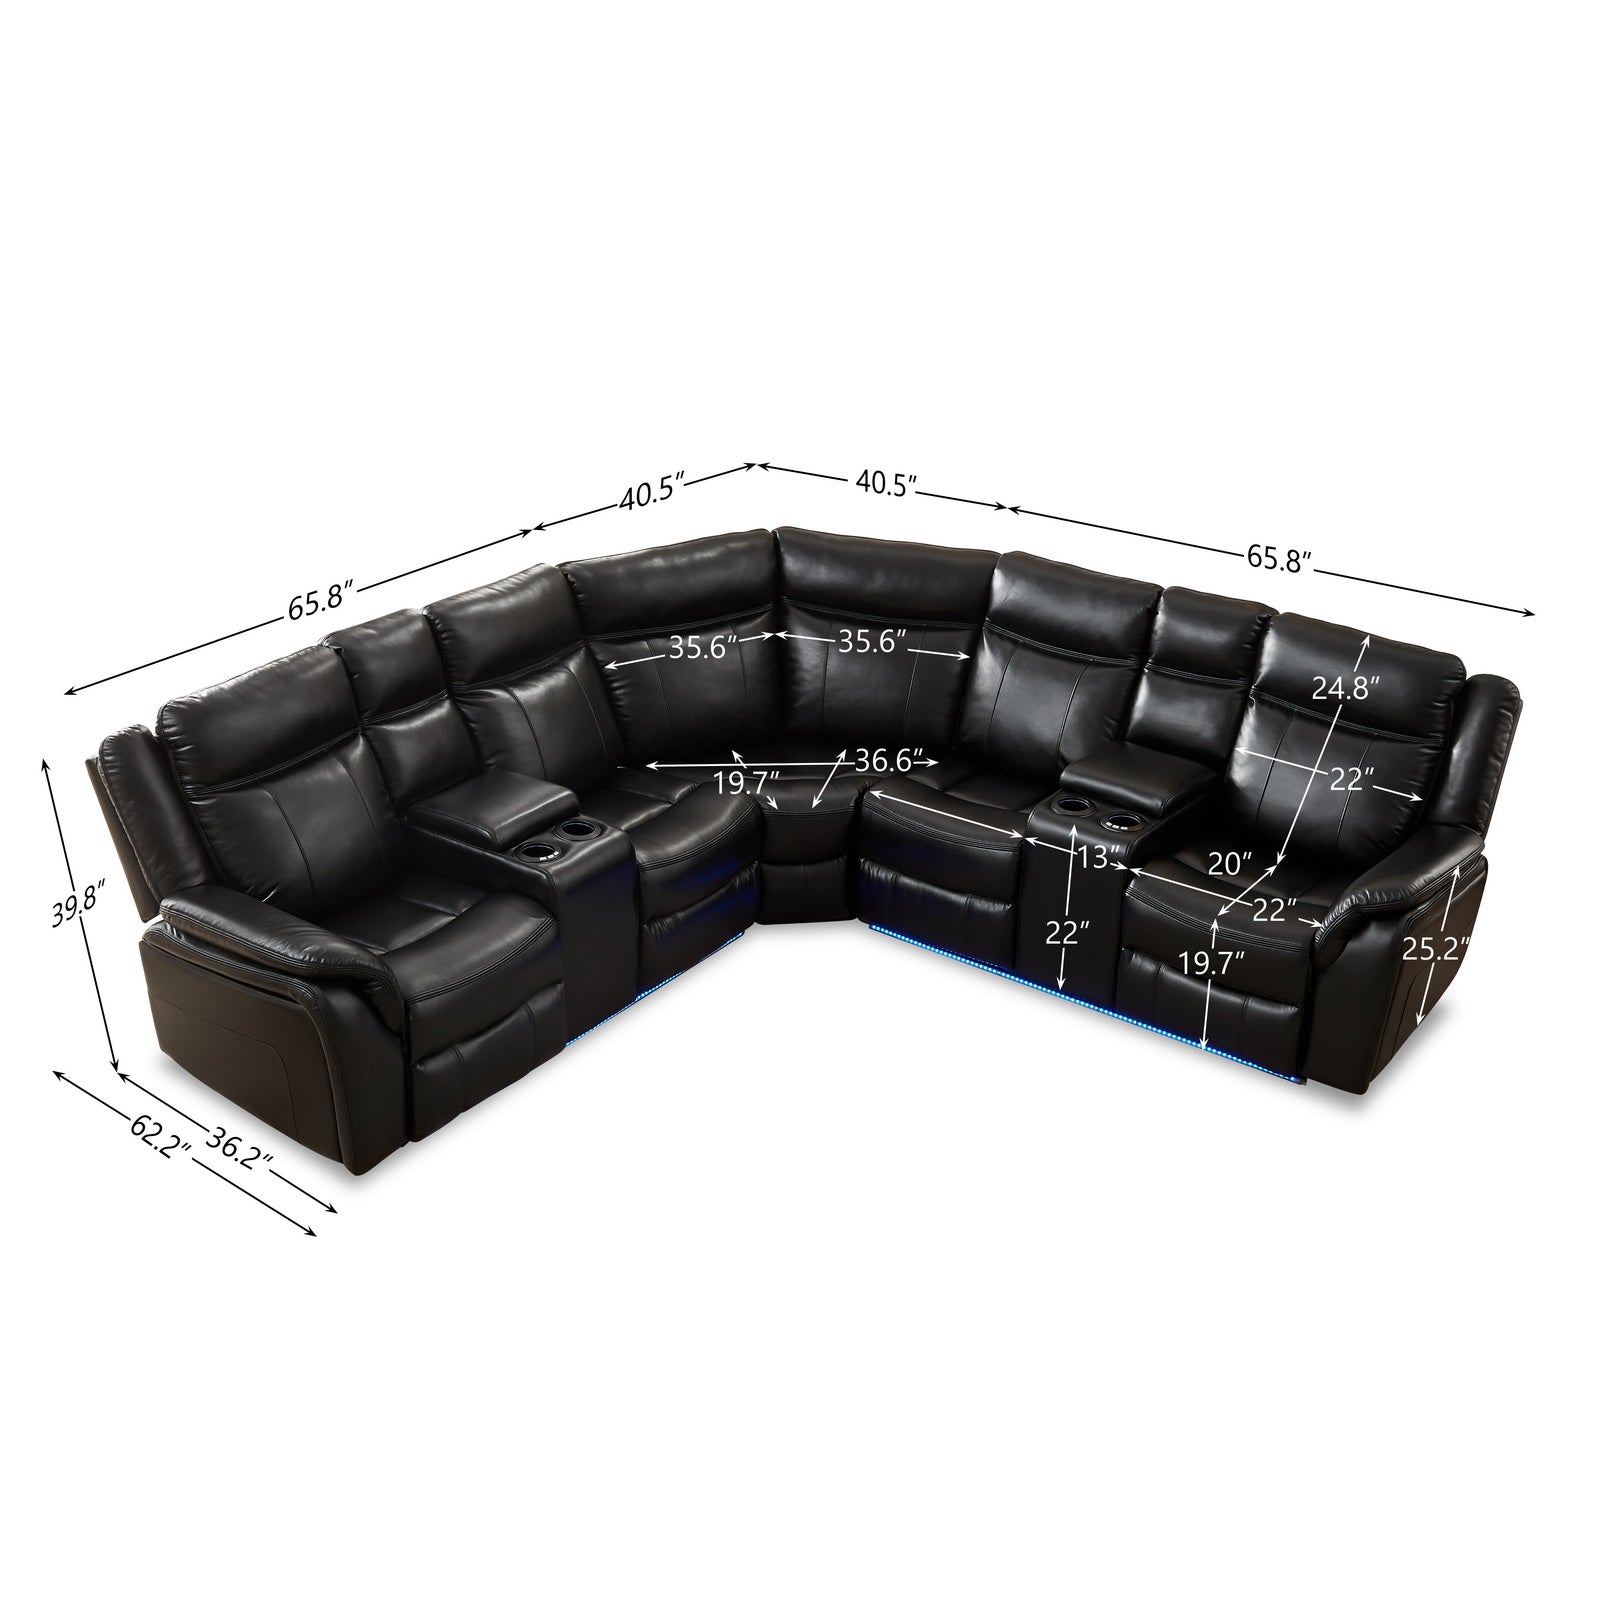 Black Technical Leather Power reclining Sectional Sofa With LED Strip-Boyel Living